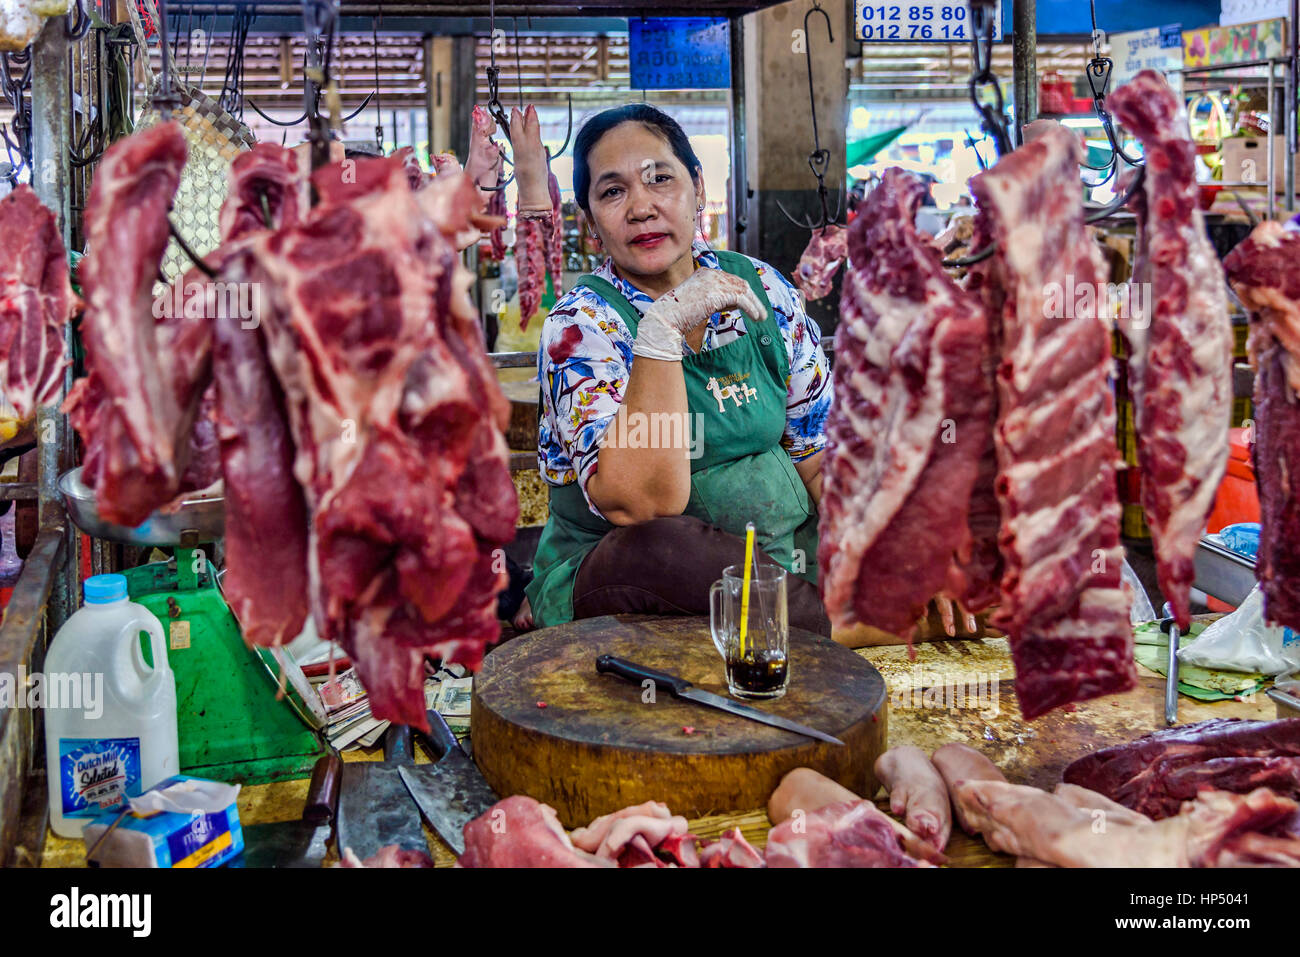 Phnom Penh, Cambodia - December 30, 2016: An unidentified woman posing in her butcher shop located in Cambodia's capital city central market Stock Photo